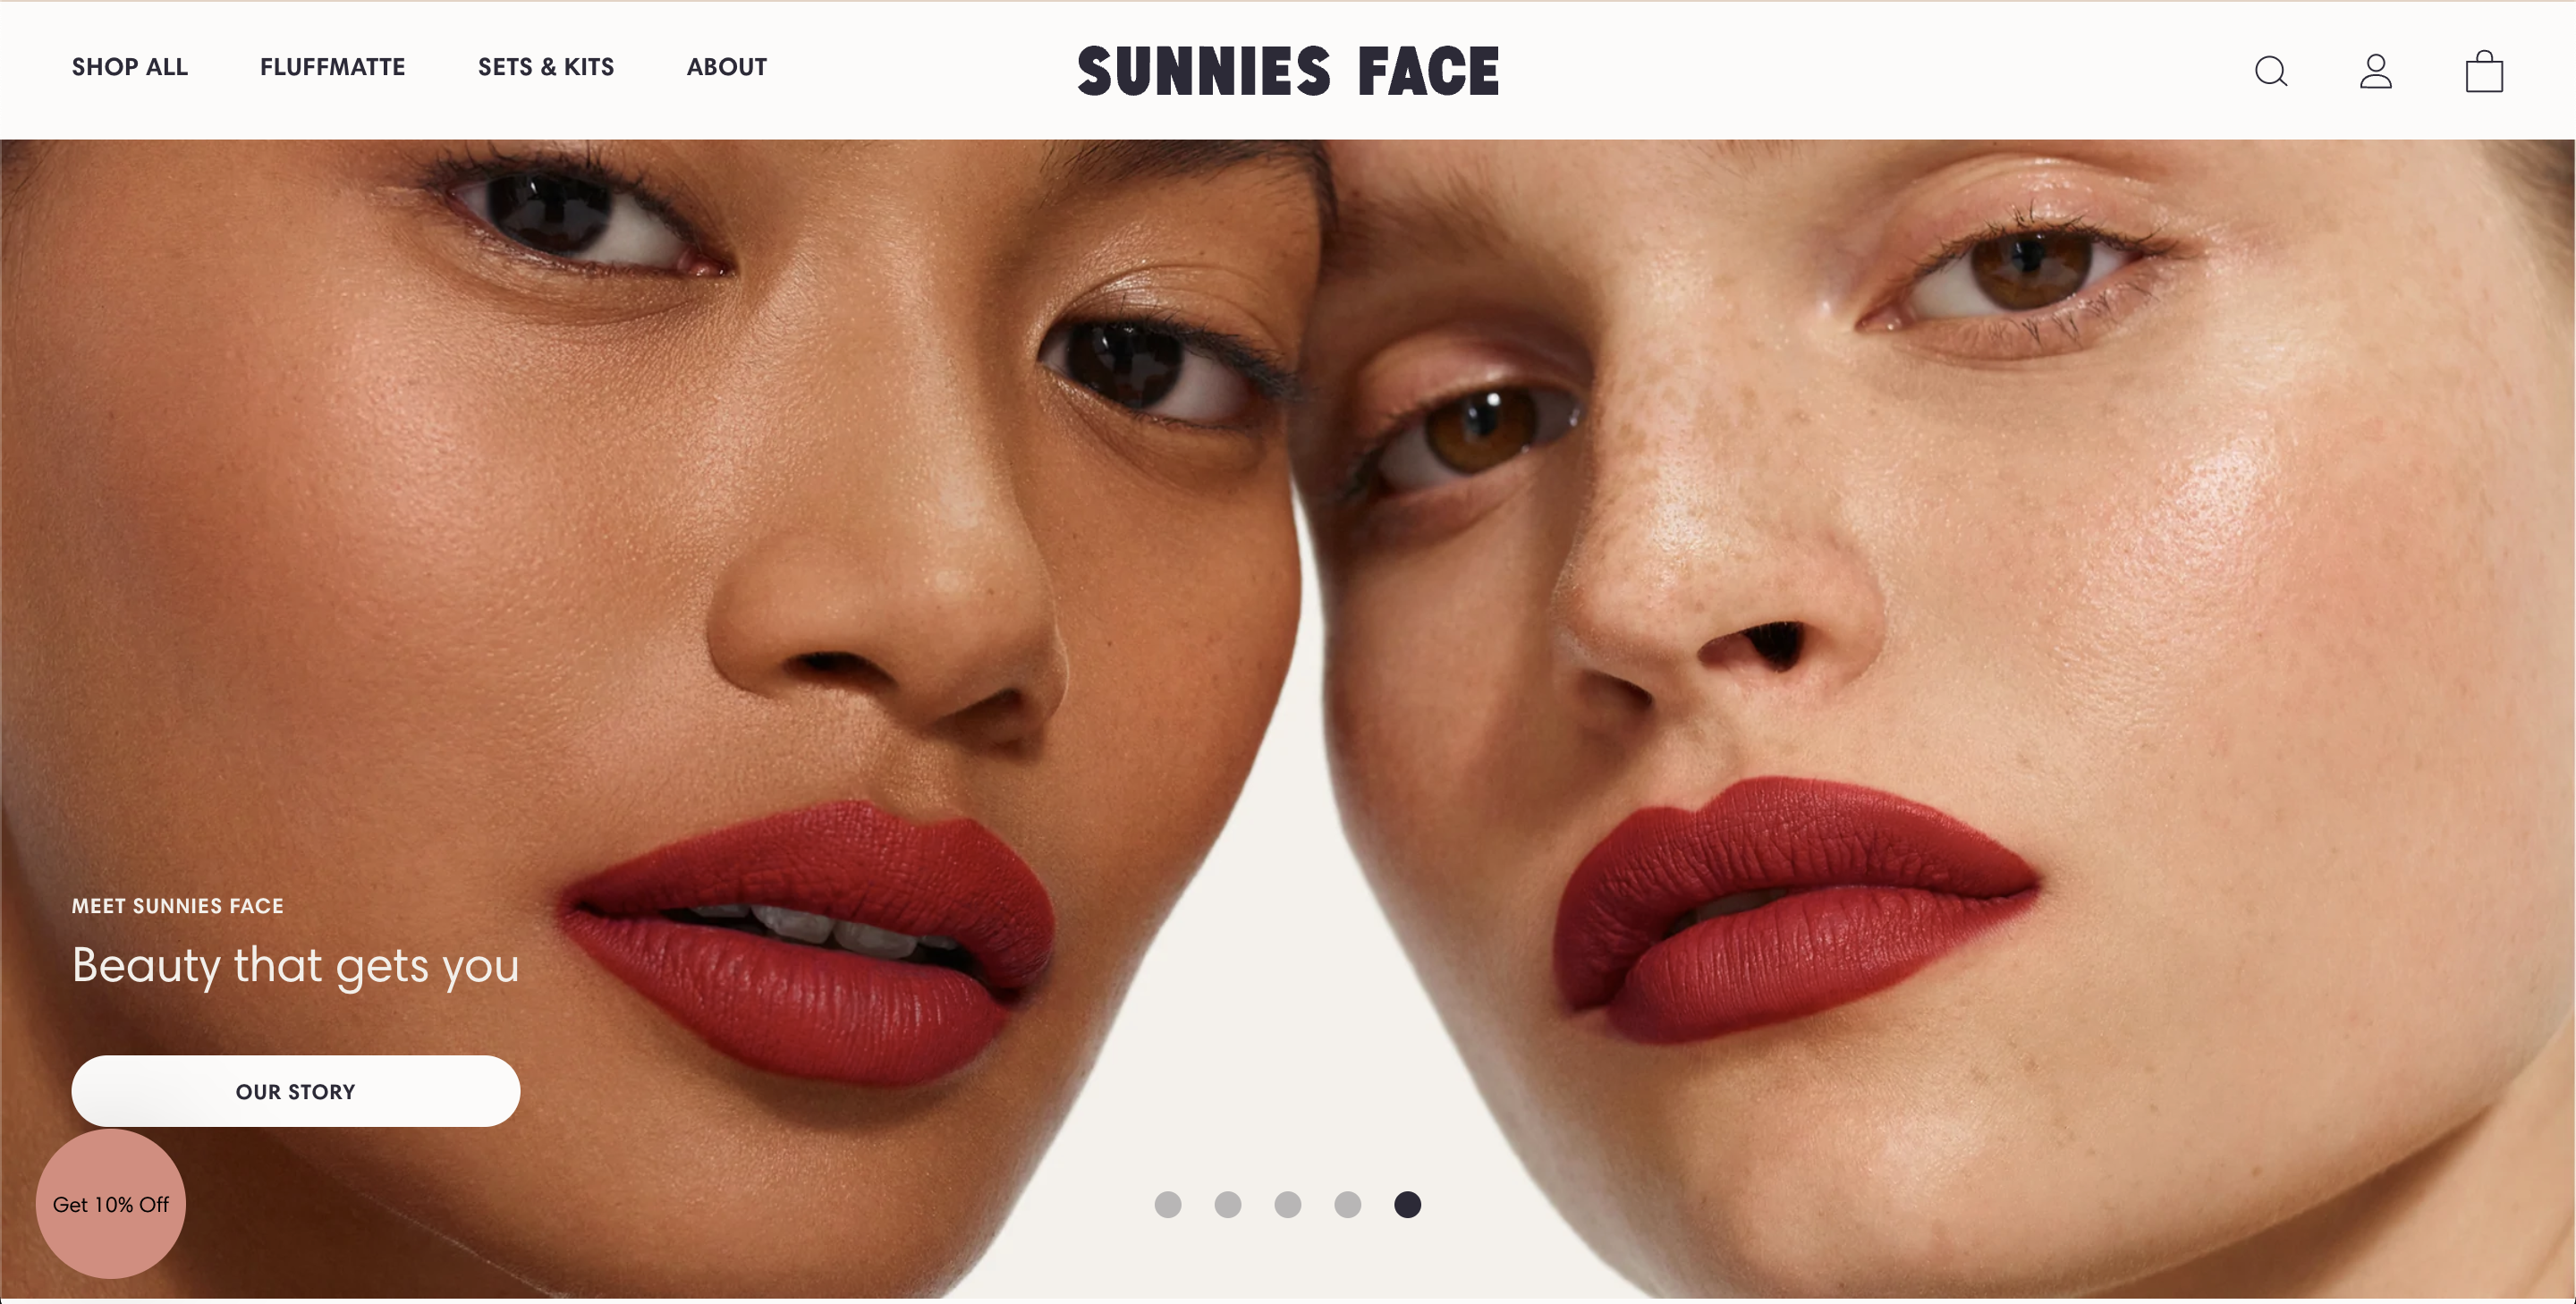 Sunnies Face Homepage Carousel